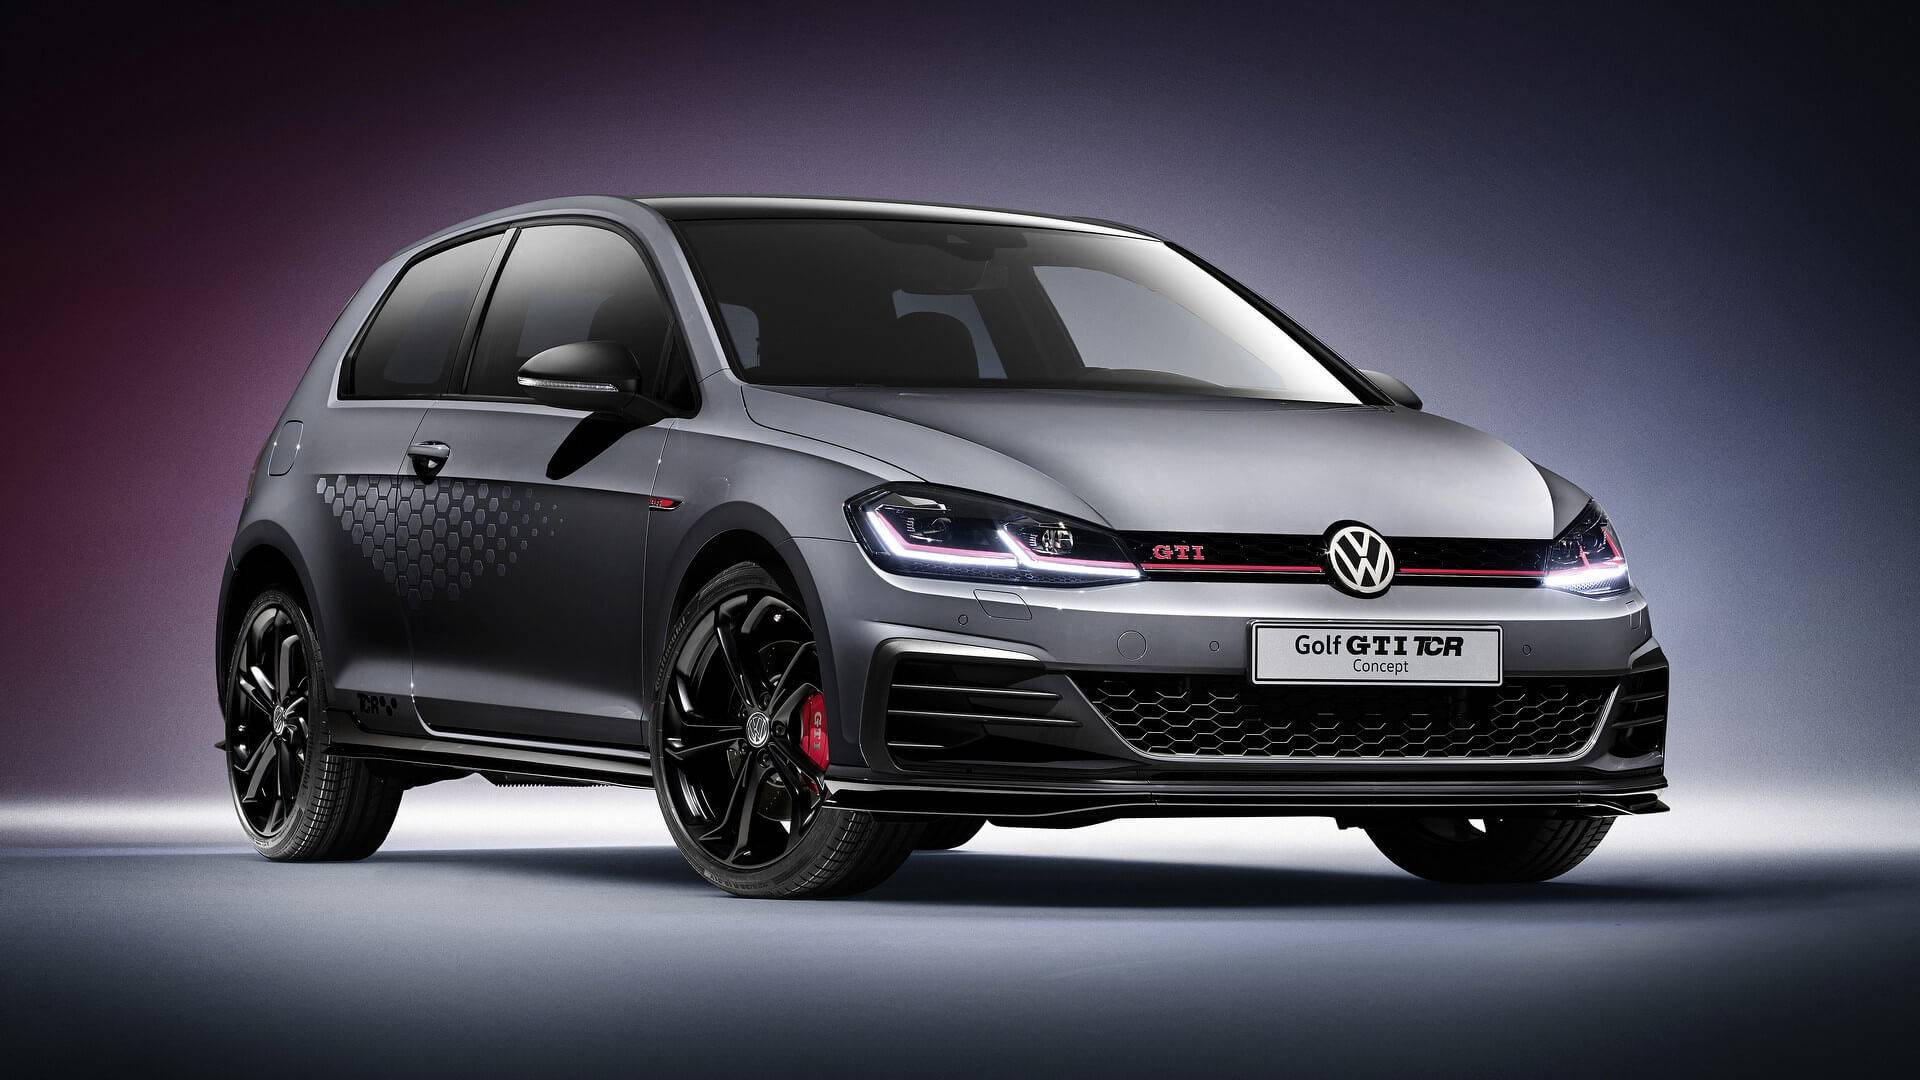 290 Horsepower Vw Golf Gti Tcr Road Car Previewed By Concept